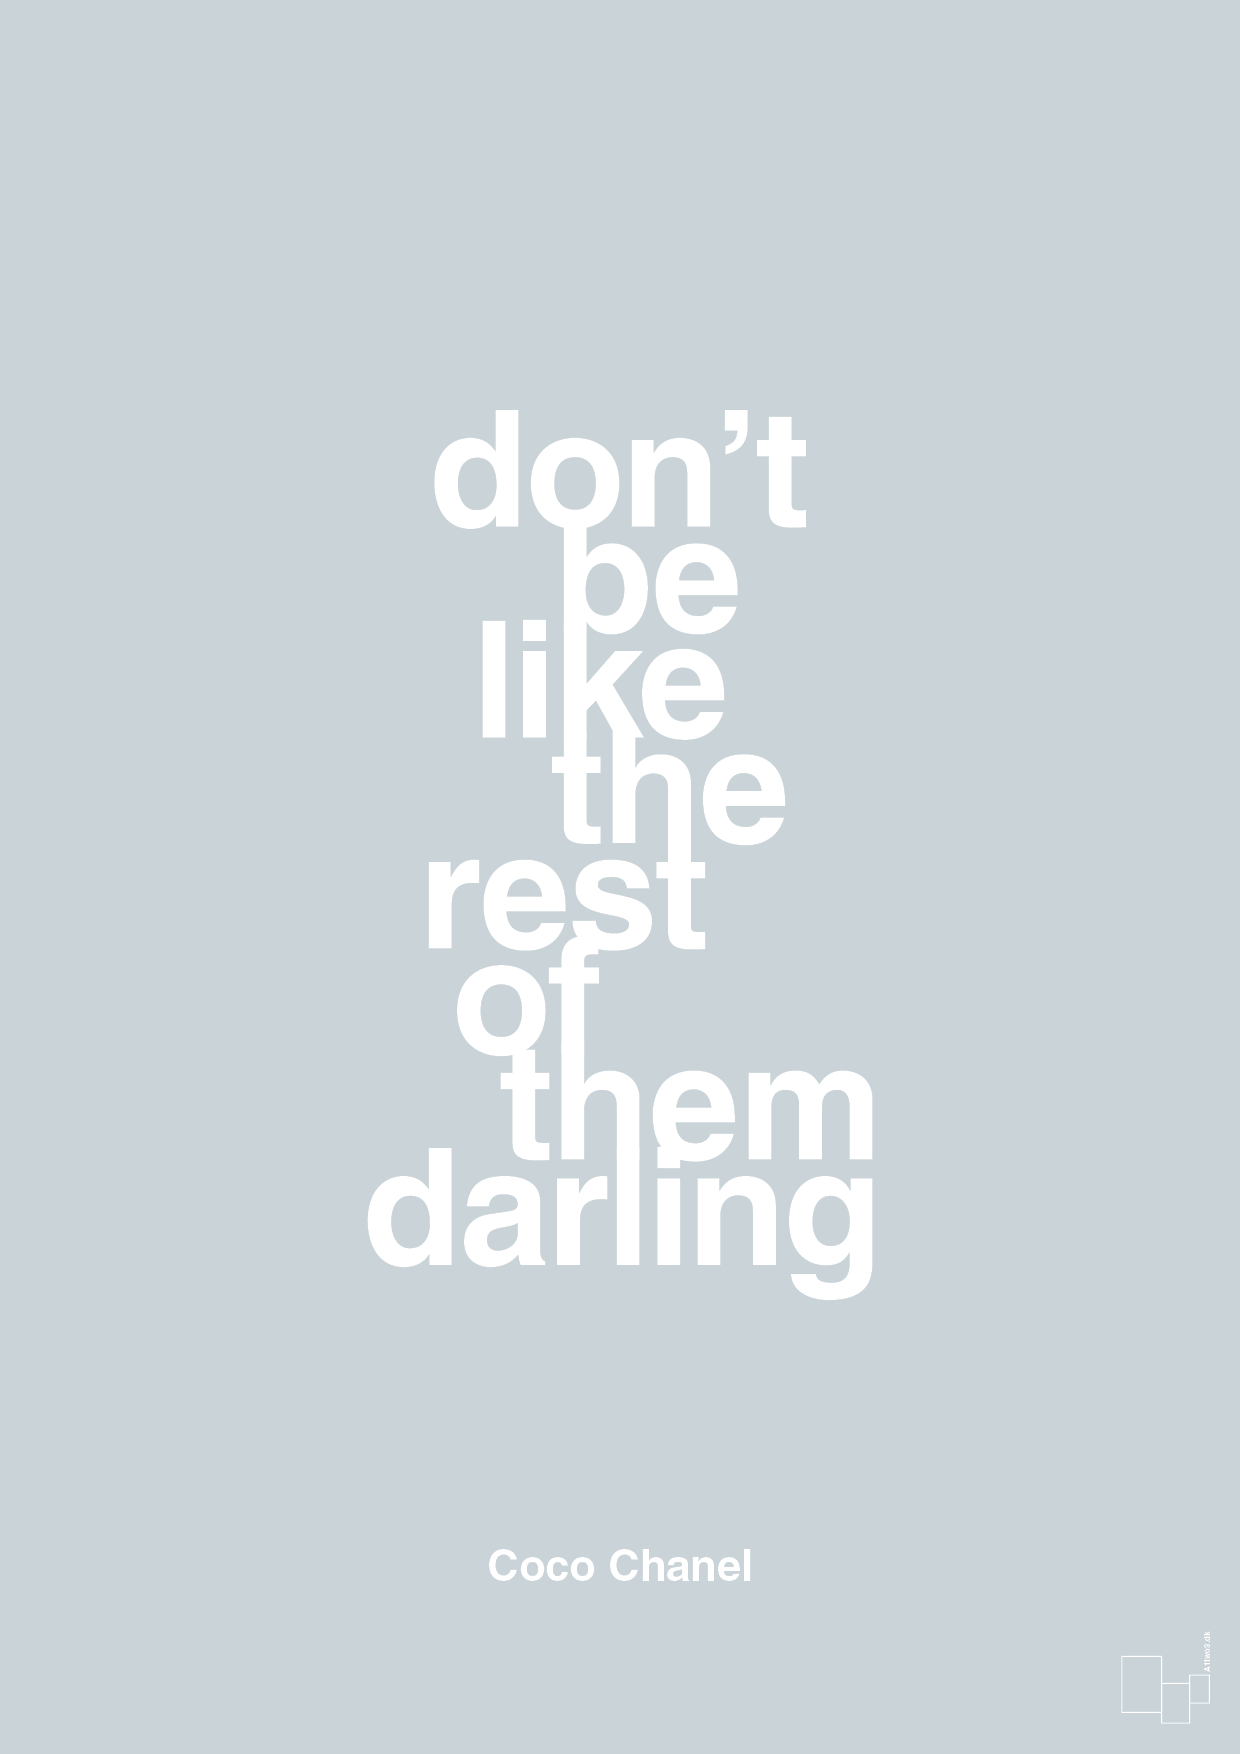 don’t be like the rest of them darling - Plakat med Citater i Light Drizzle